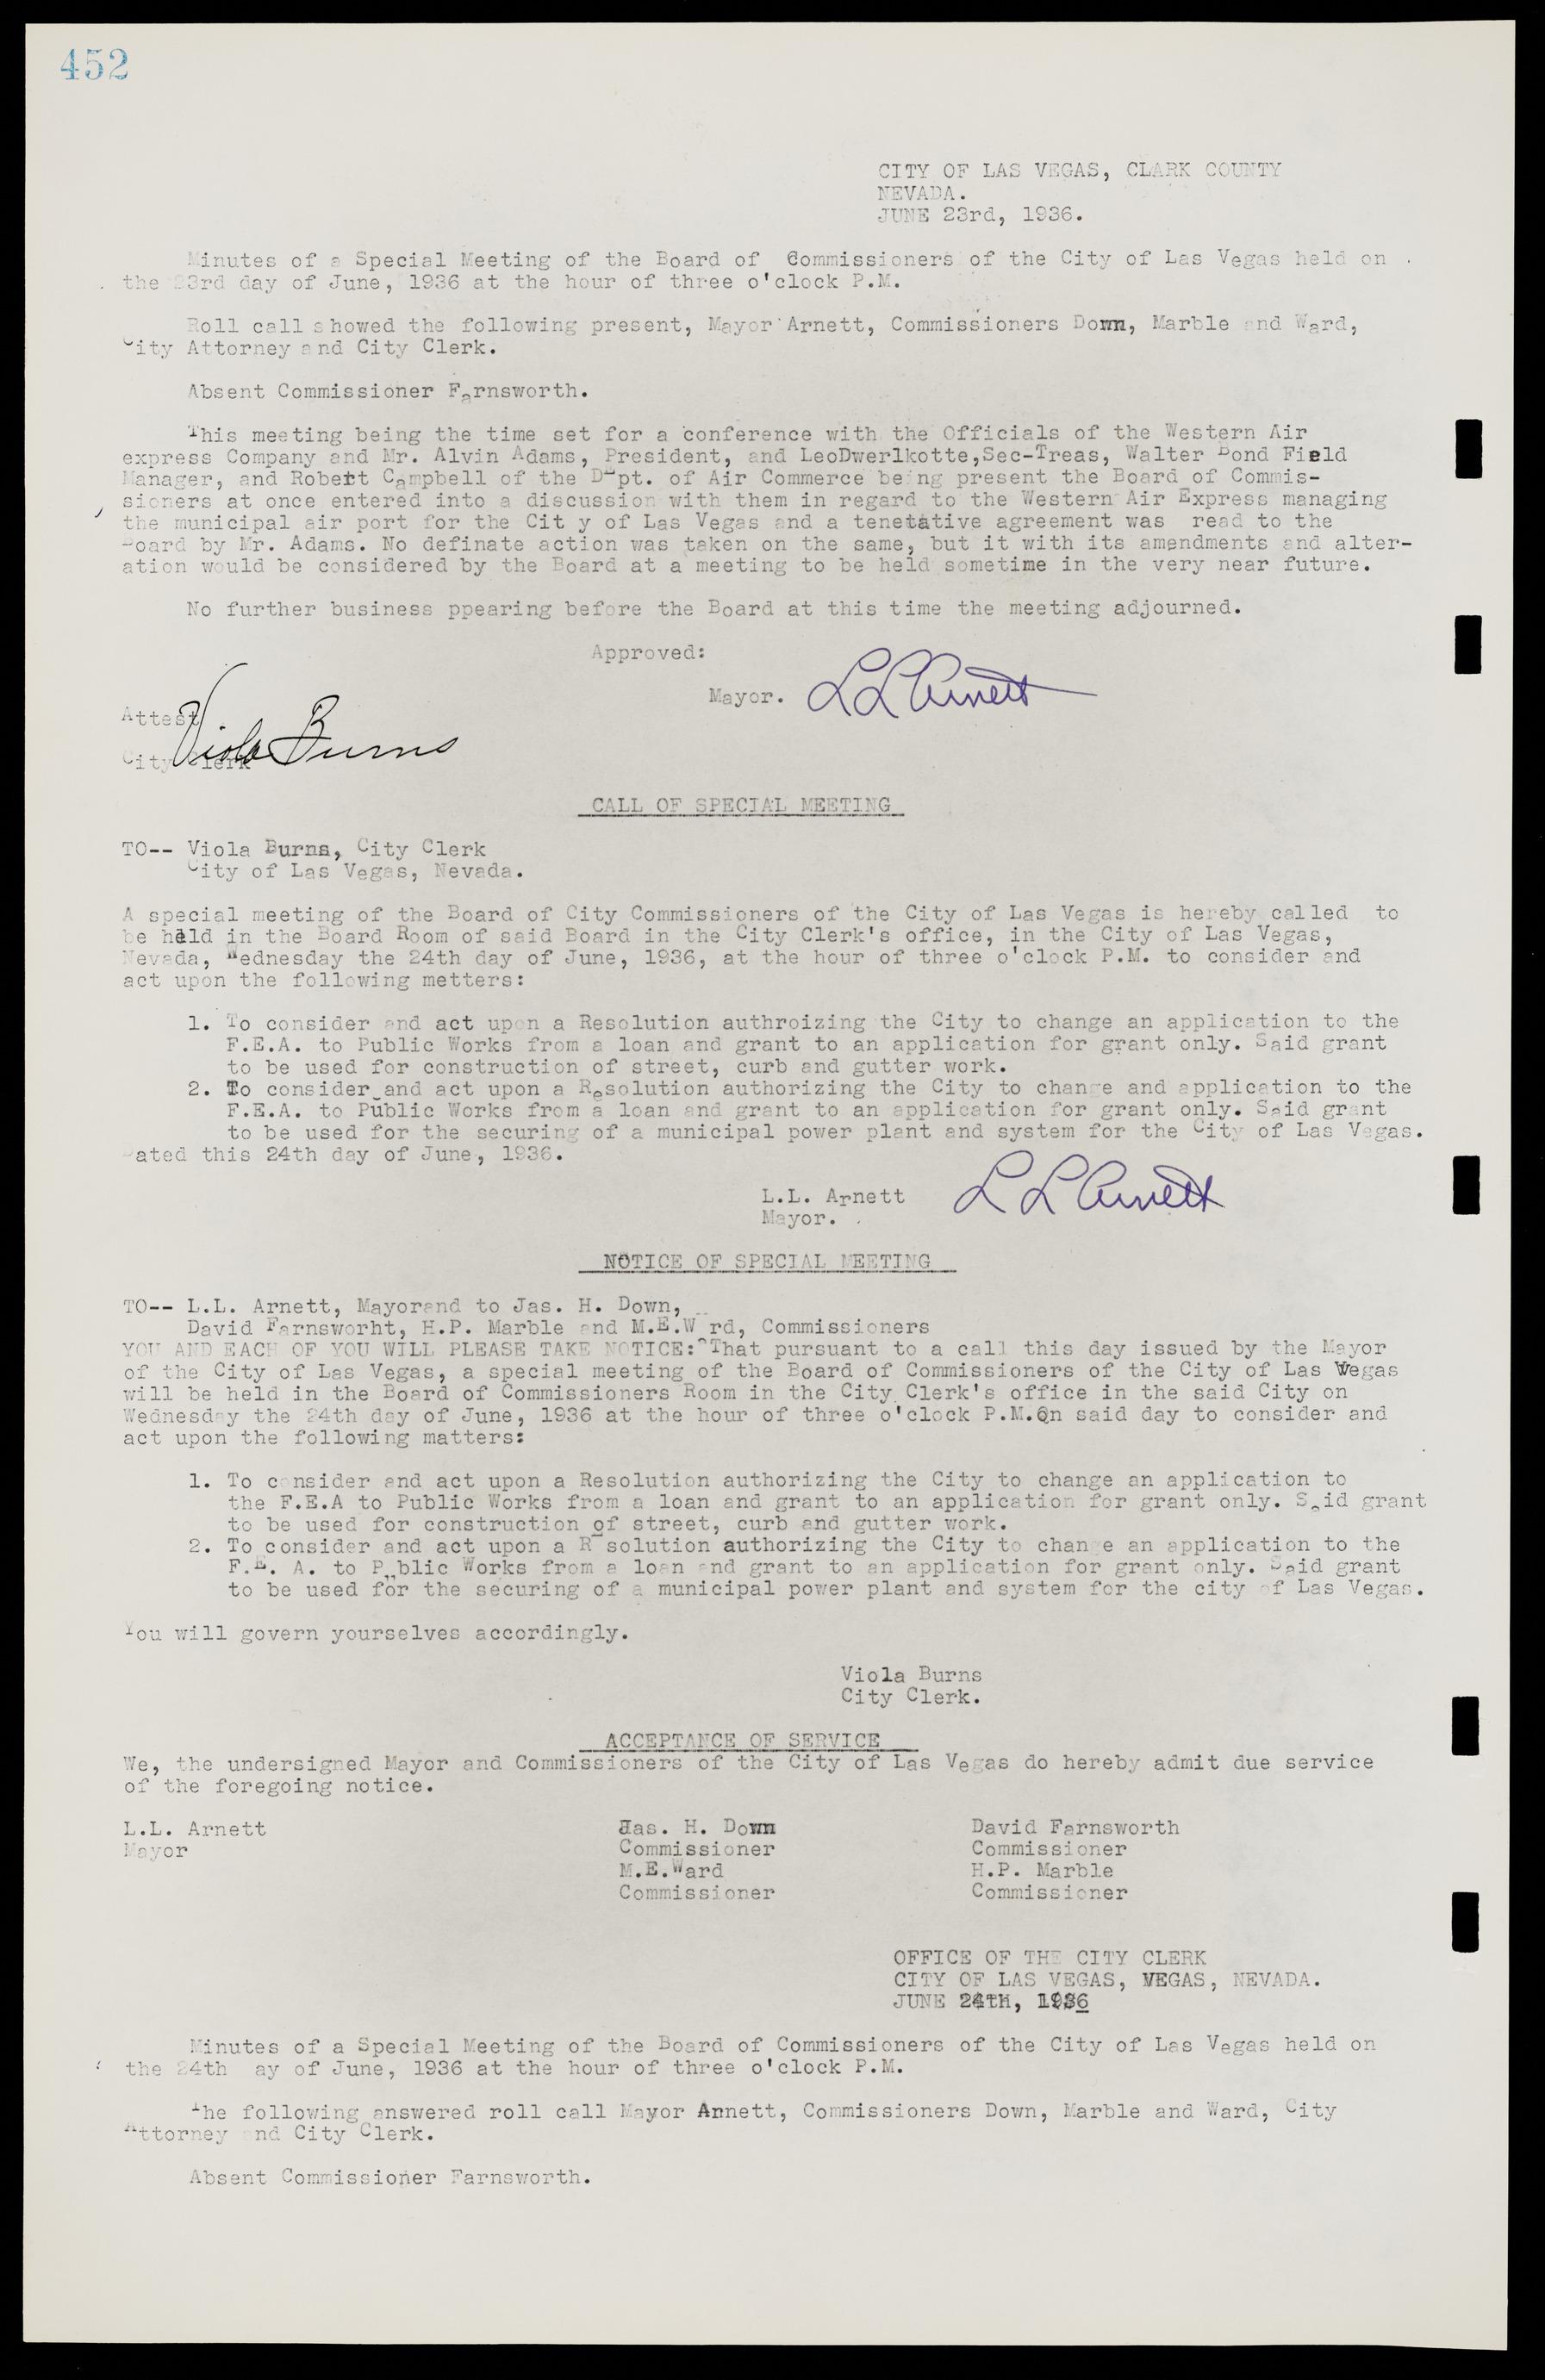 Las Vegas City Commission Minutes, May 14, 1929 to February 11, 1937, lvc000003-459